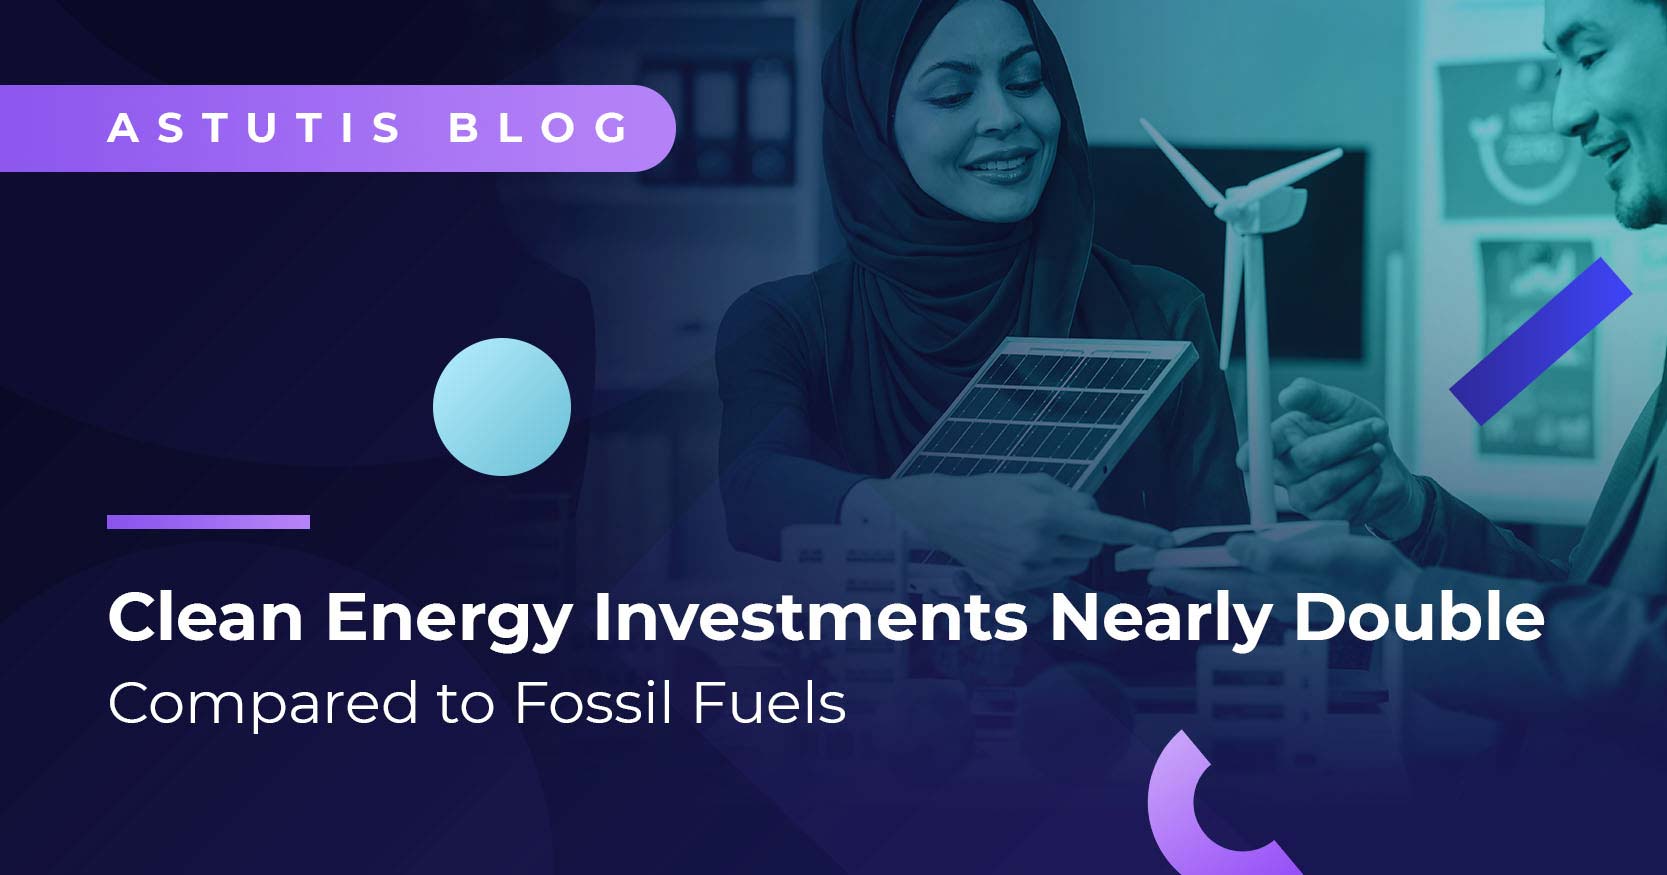 Clean Energy Investments Nearly Double the Investment in Fossil Fuels Image